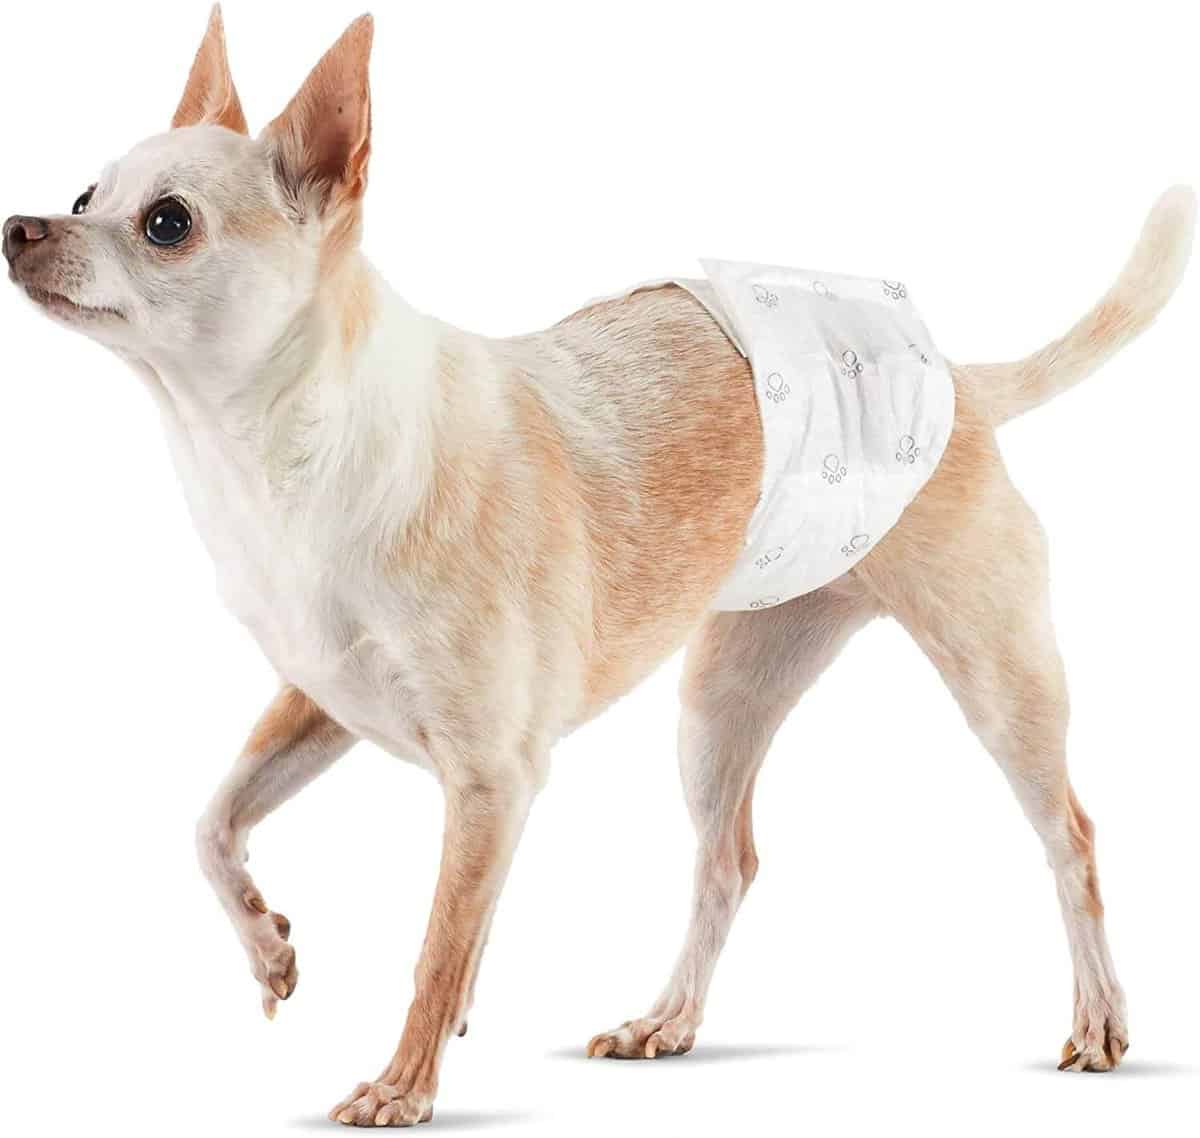 Why do dogs need diapers?